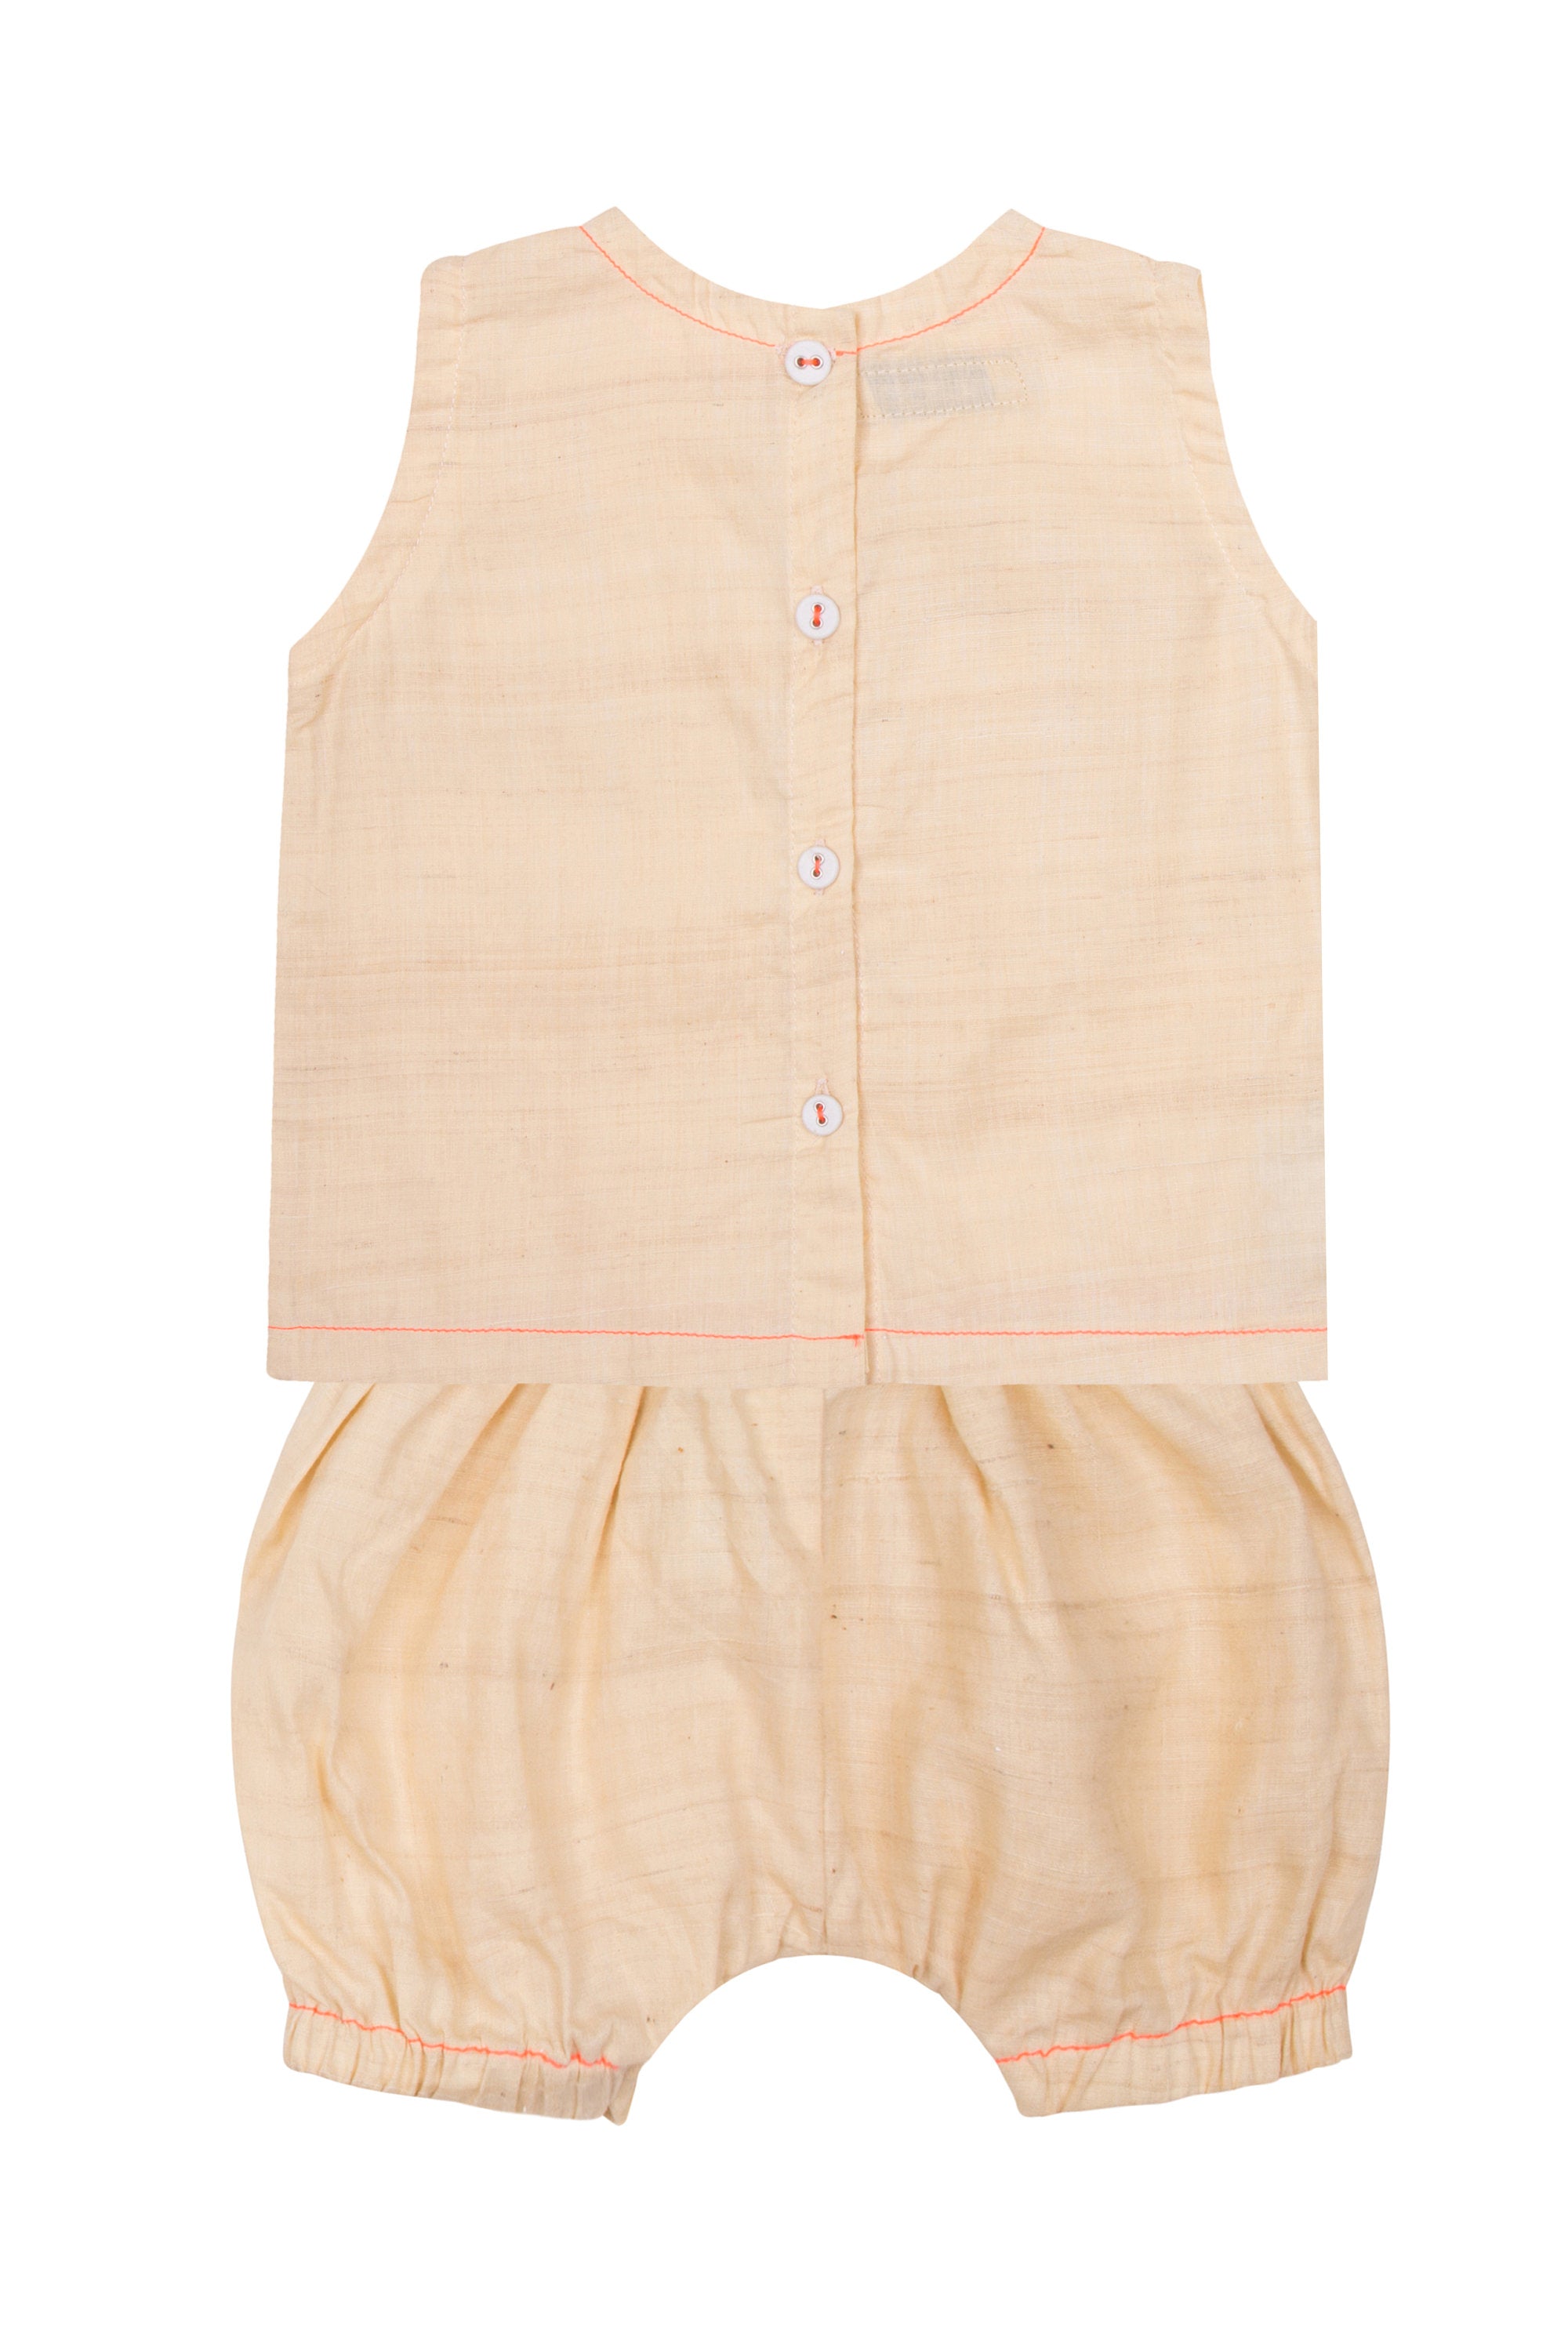 vest and pants set in undyed handloom silk/ cotton